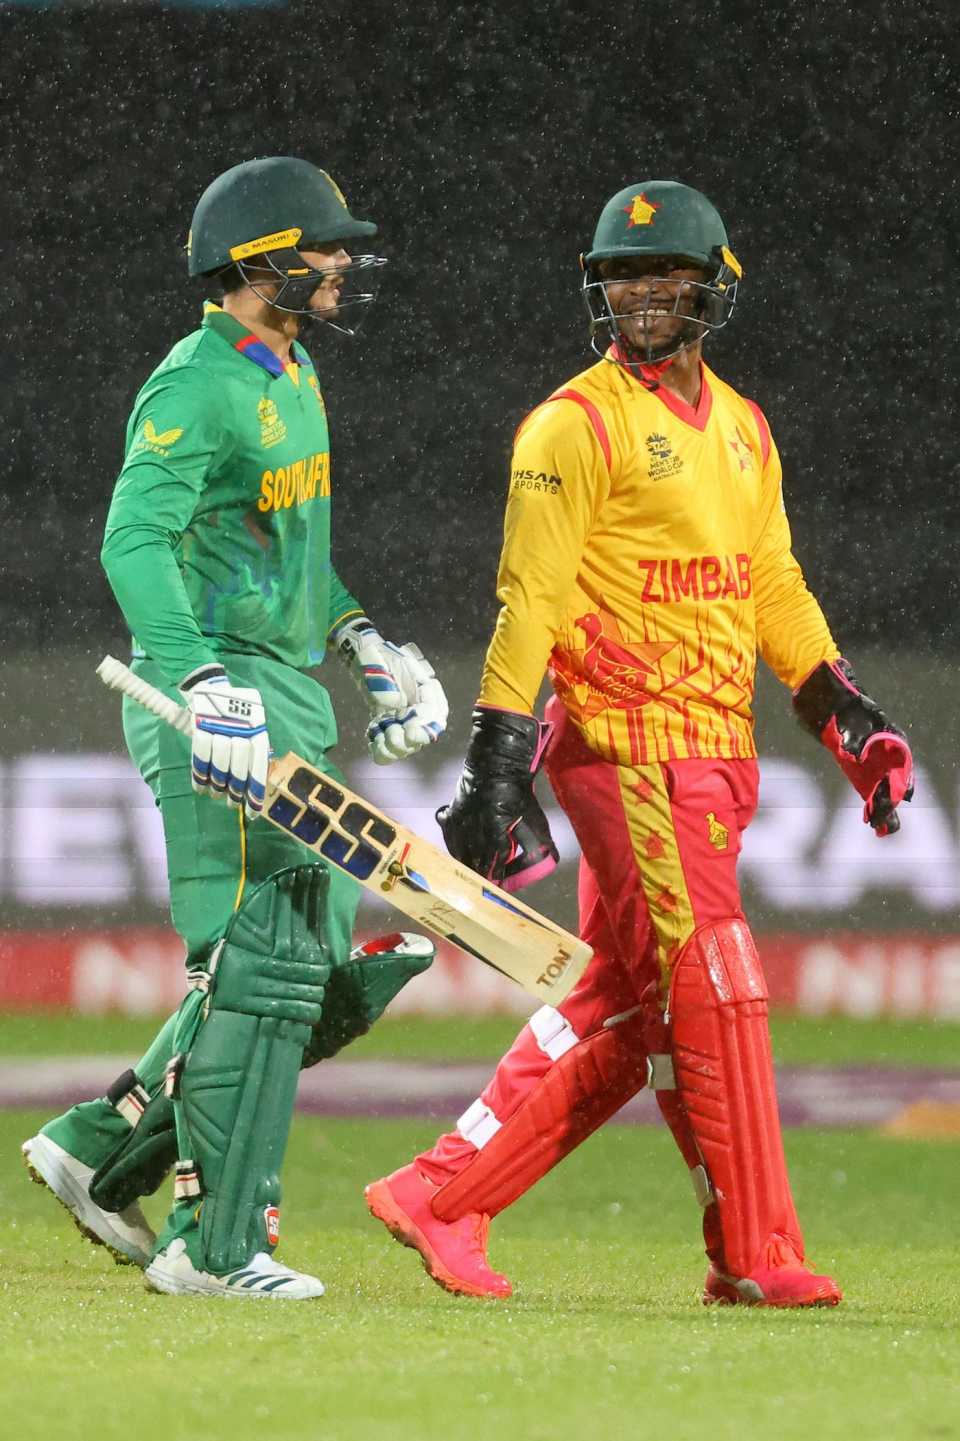 Regis Chakabva understandably looks happier than Quinton de Kock as they walk off one last time, South Africa vs Zimbabwe, T20 World Cup, Hobart, October 24, 2022